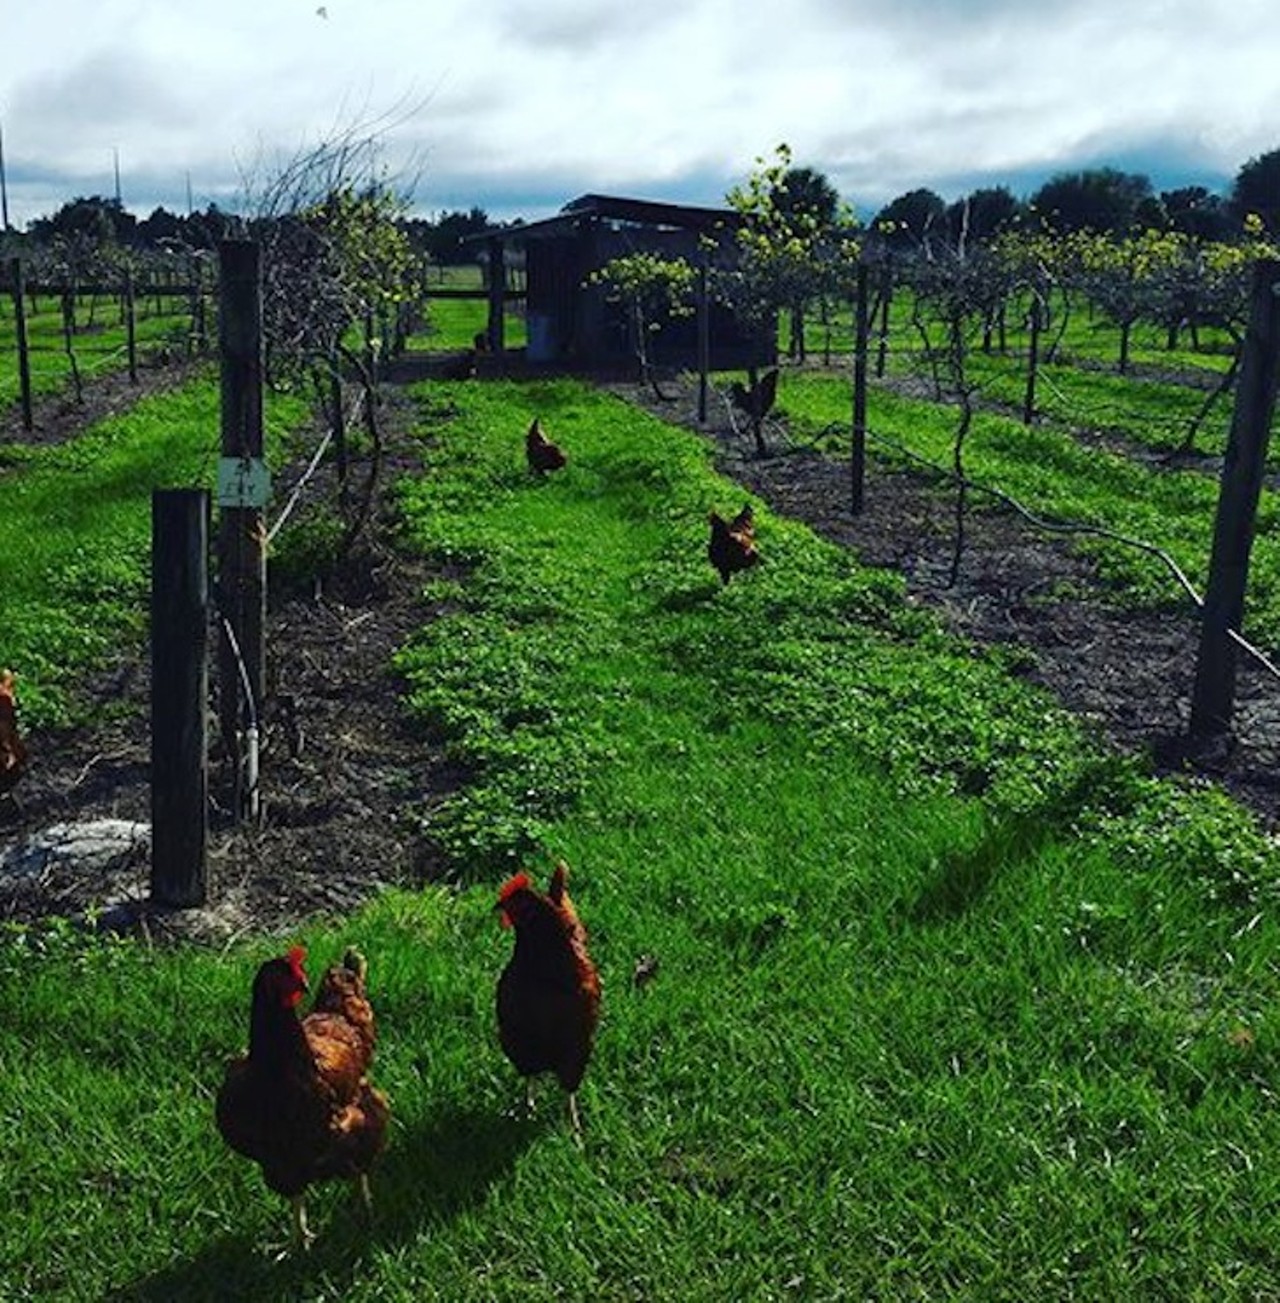 Henscratch Farms Vineyard & Winery
980 Henscratch Road, Lake Placid | 863-699-2060
While you tour this winery it&#146;s best to watch your step; 200 free range hens roam the vineyard, meaning you&#146;re in luck if you were looking for an omelette to accompany your country white. 
Photo via ninaalynnn/Instagram